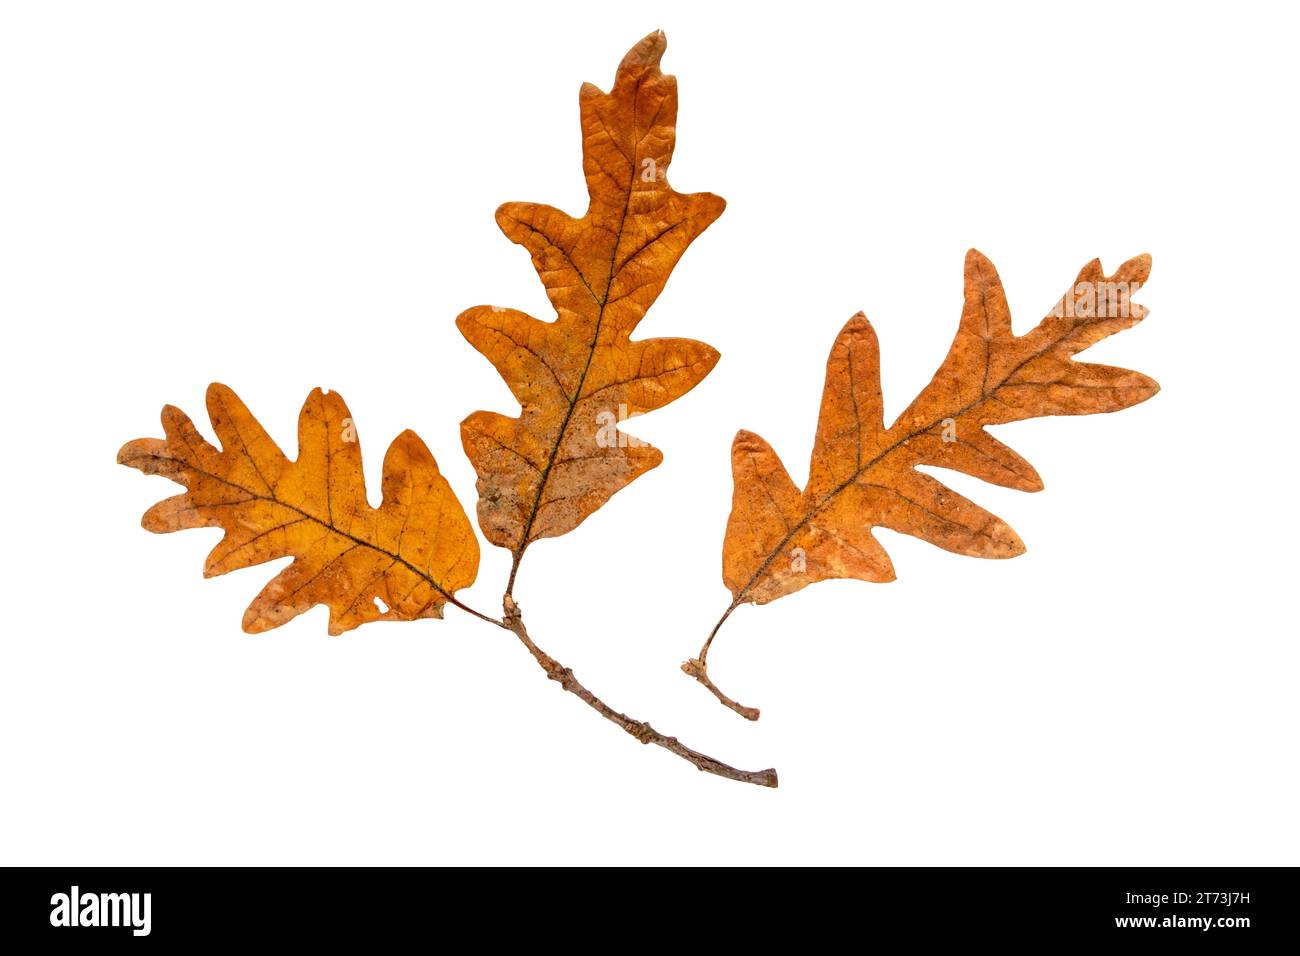 Oak tree autumn dry brown leaf and branch isolated on white background. Adaxial surface or upper side of fall foliage. Stock Photo